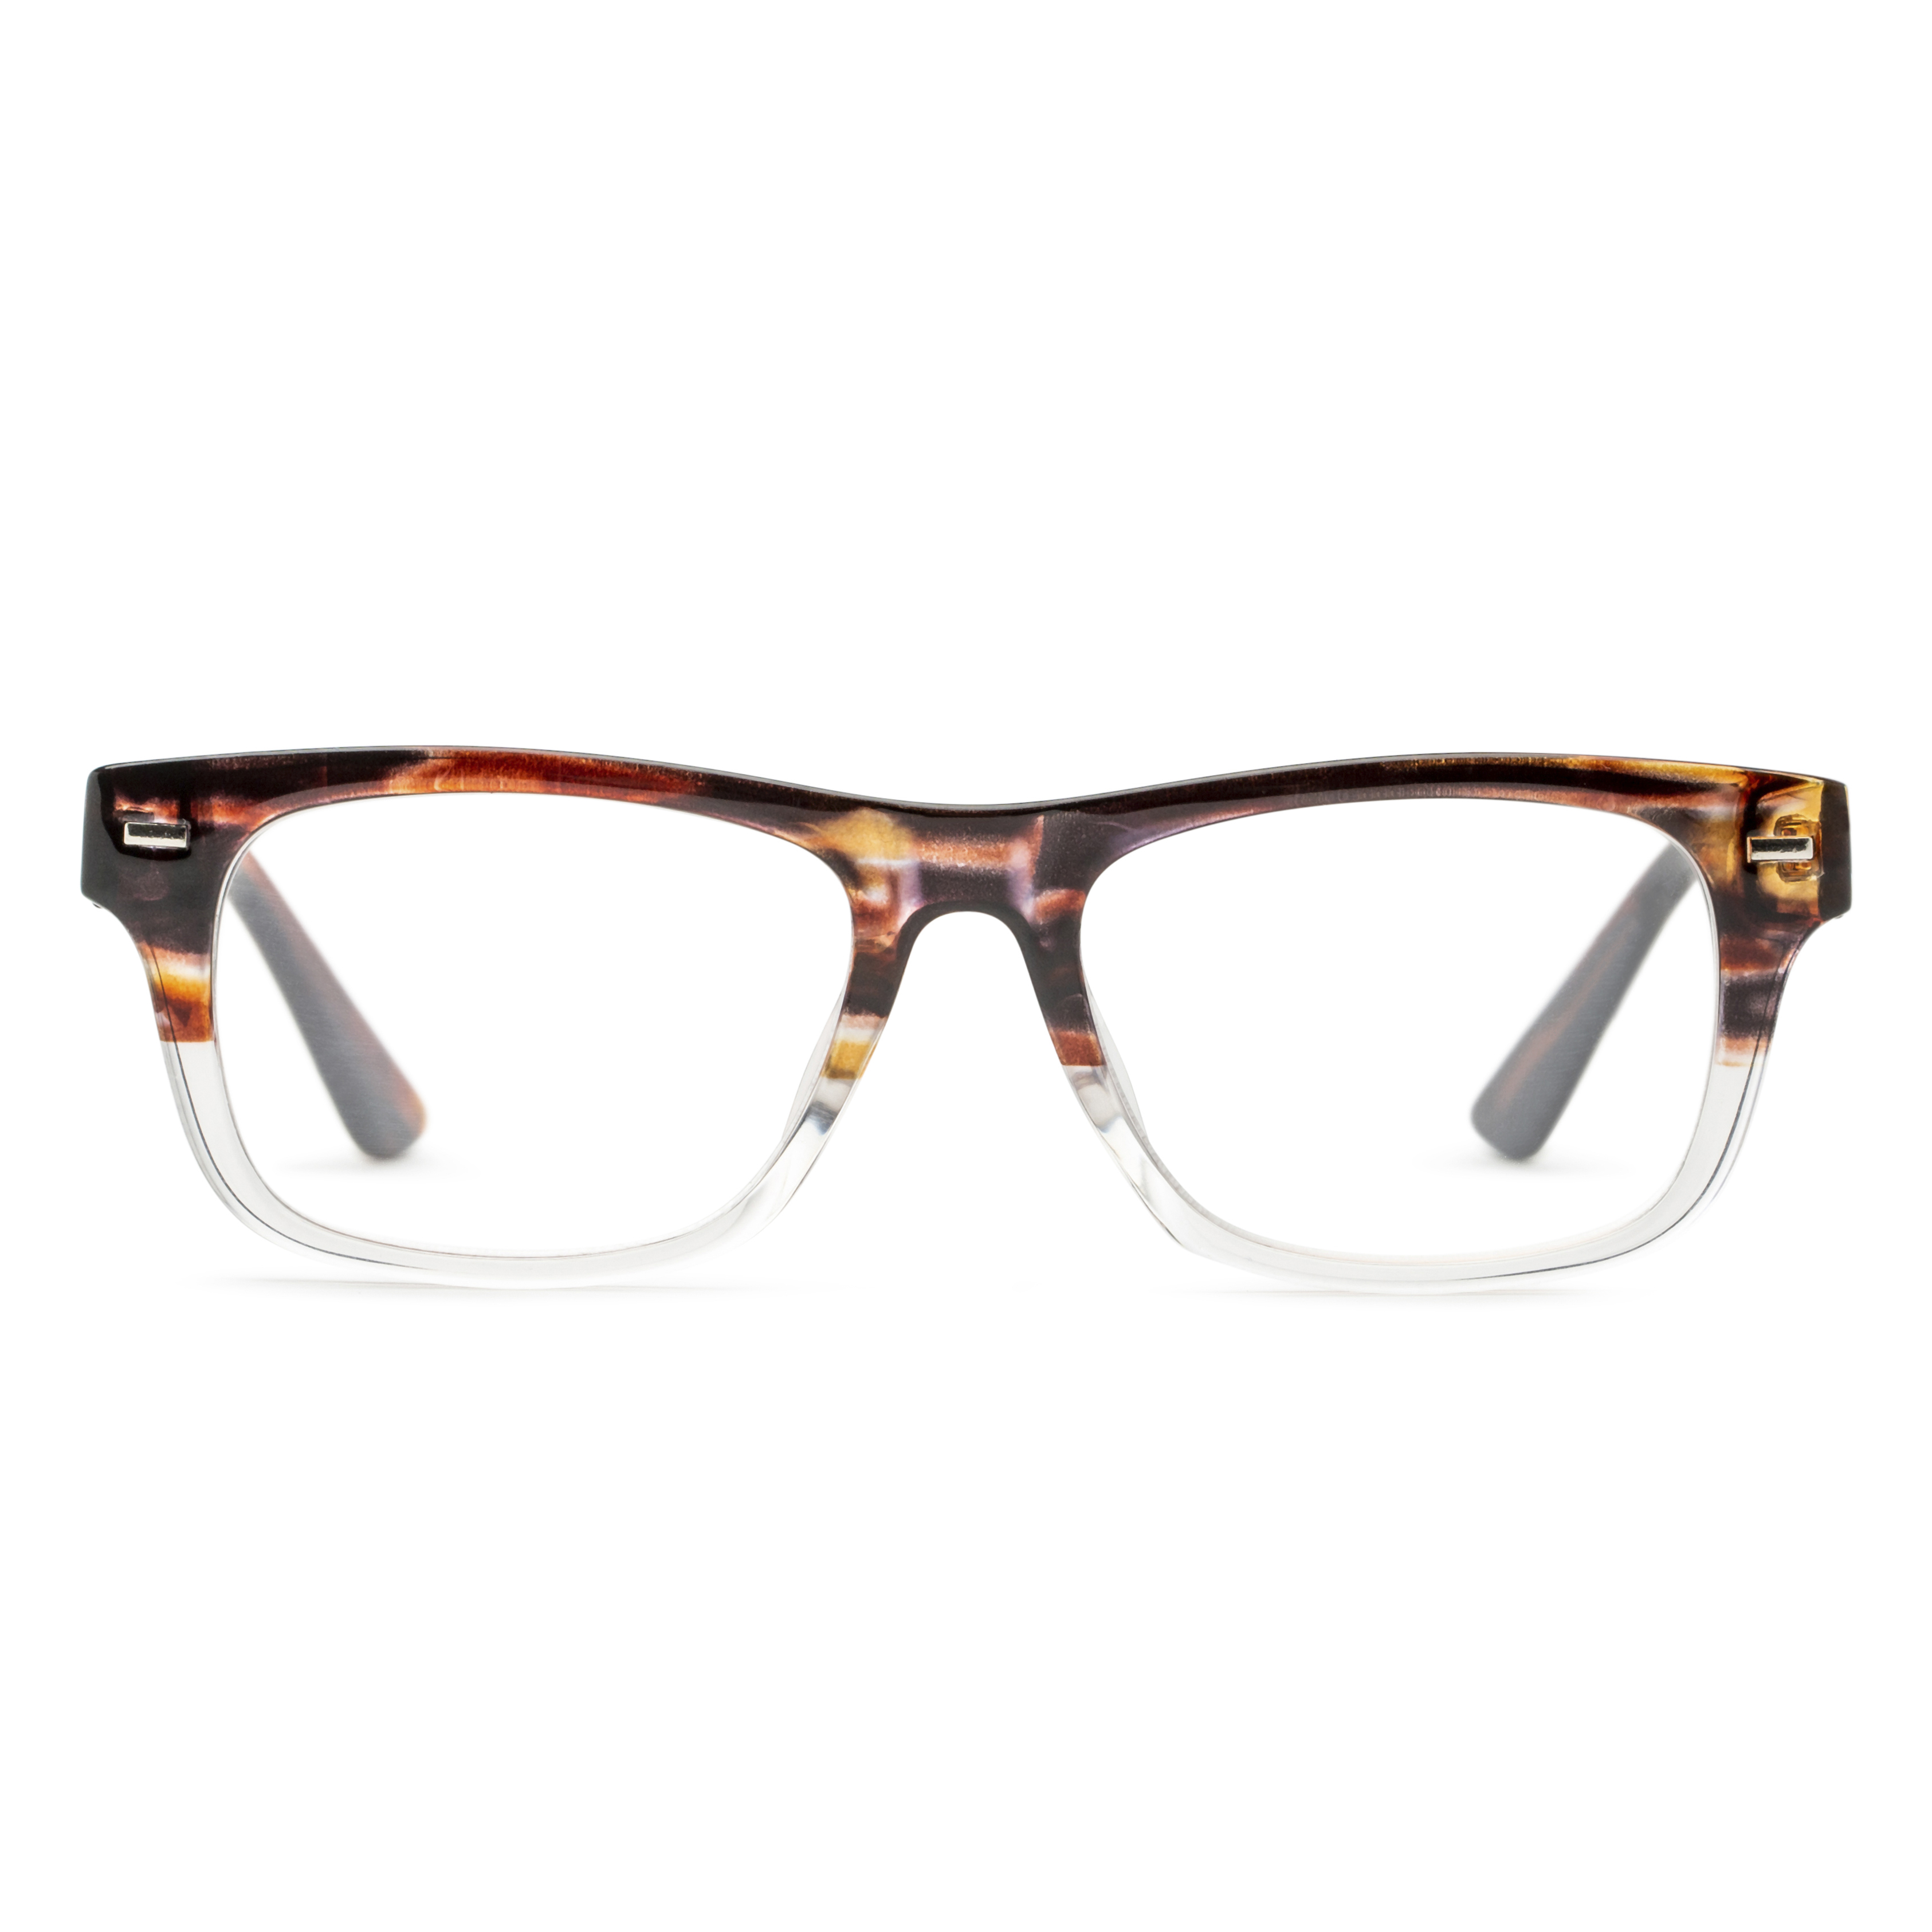 Men's Square Reading Glasses In Tortoise By Foster Grant - Bayview - +2.75